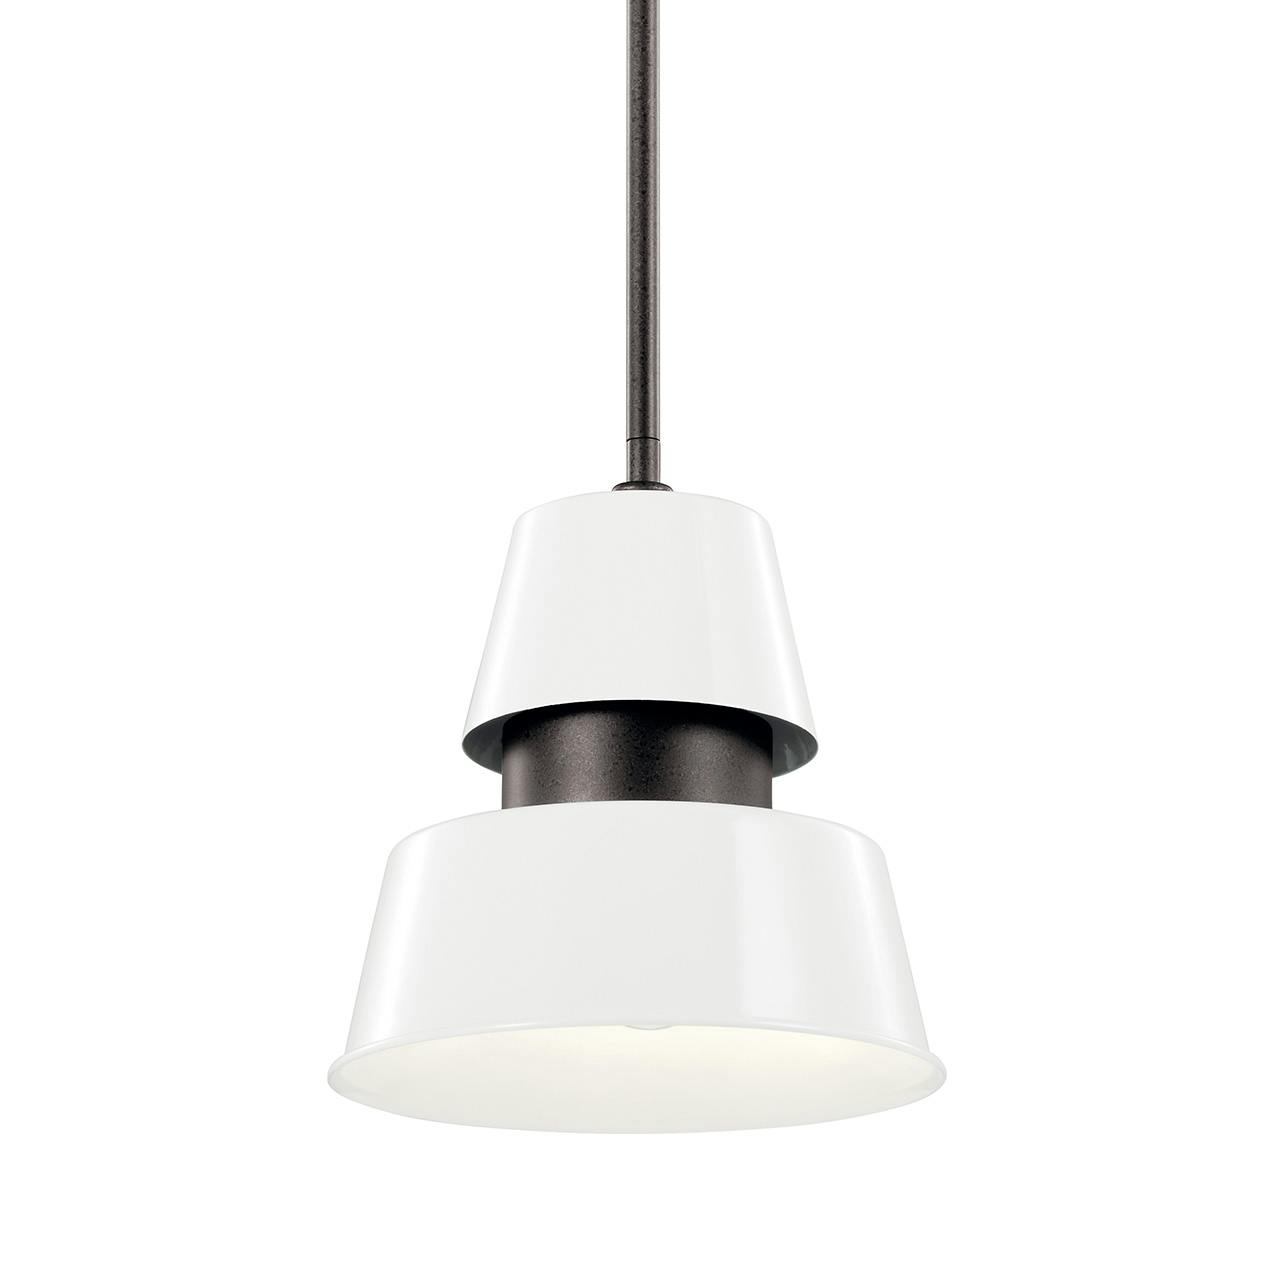 Lozano 9.5" 1 Light Pendant White without the canopy on a white background